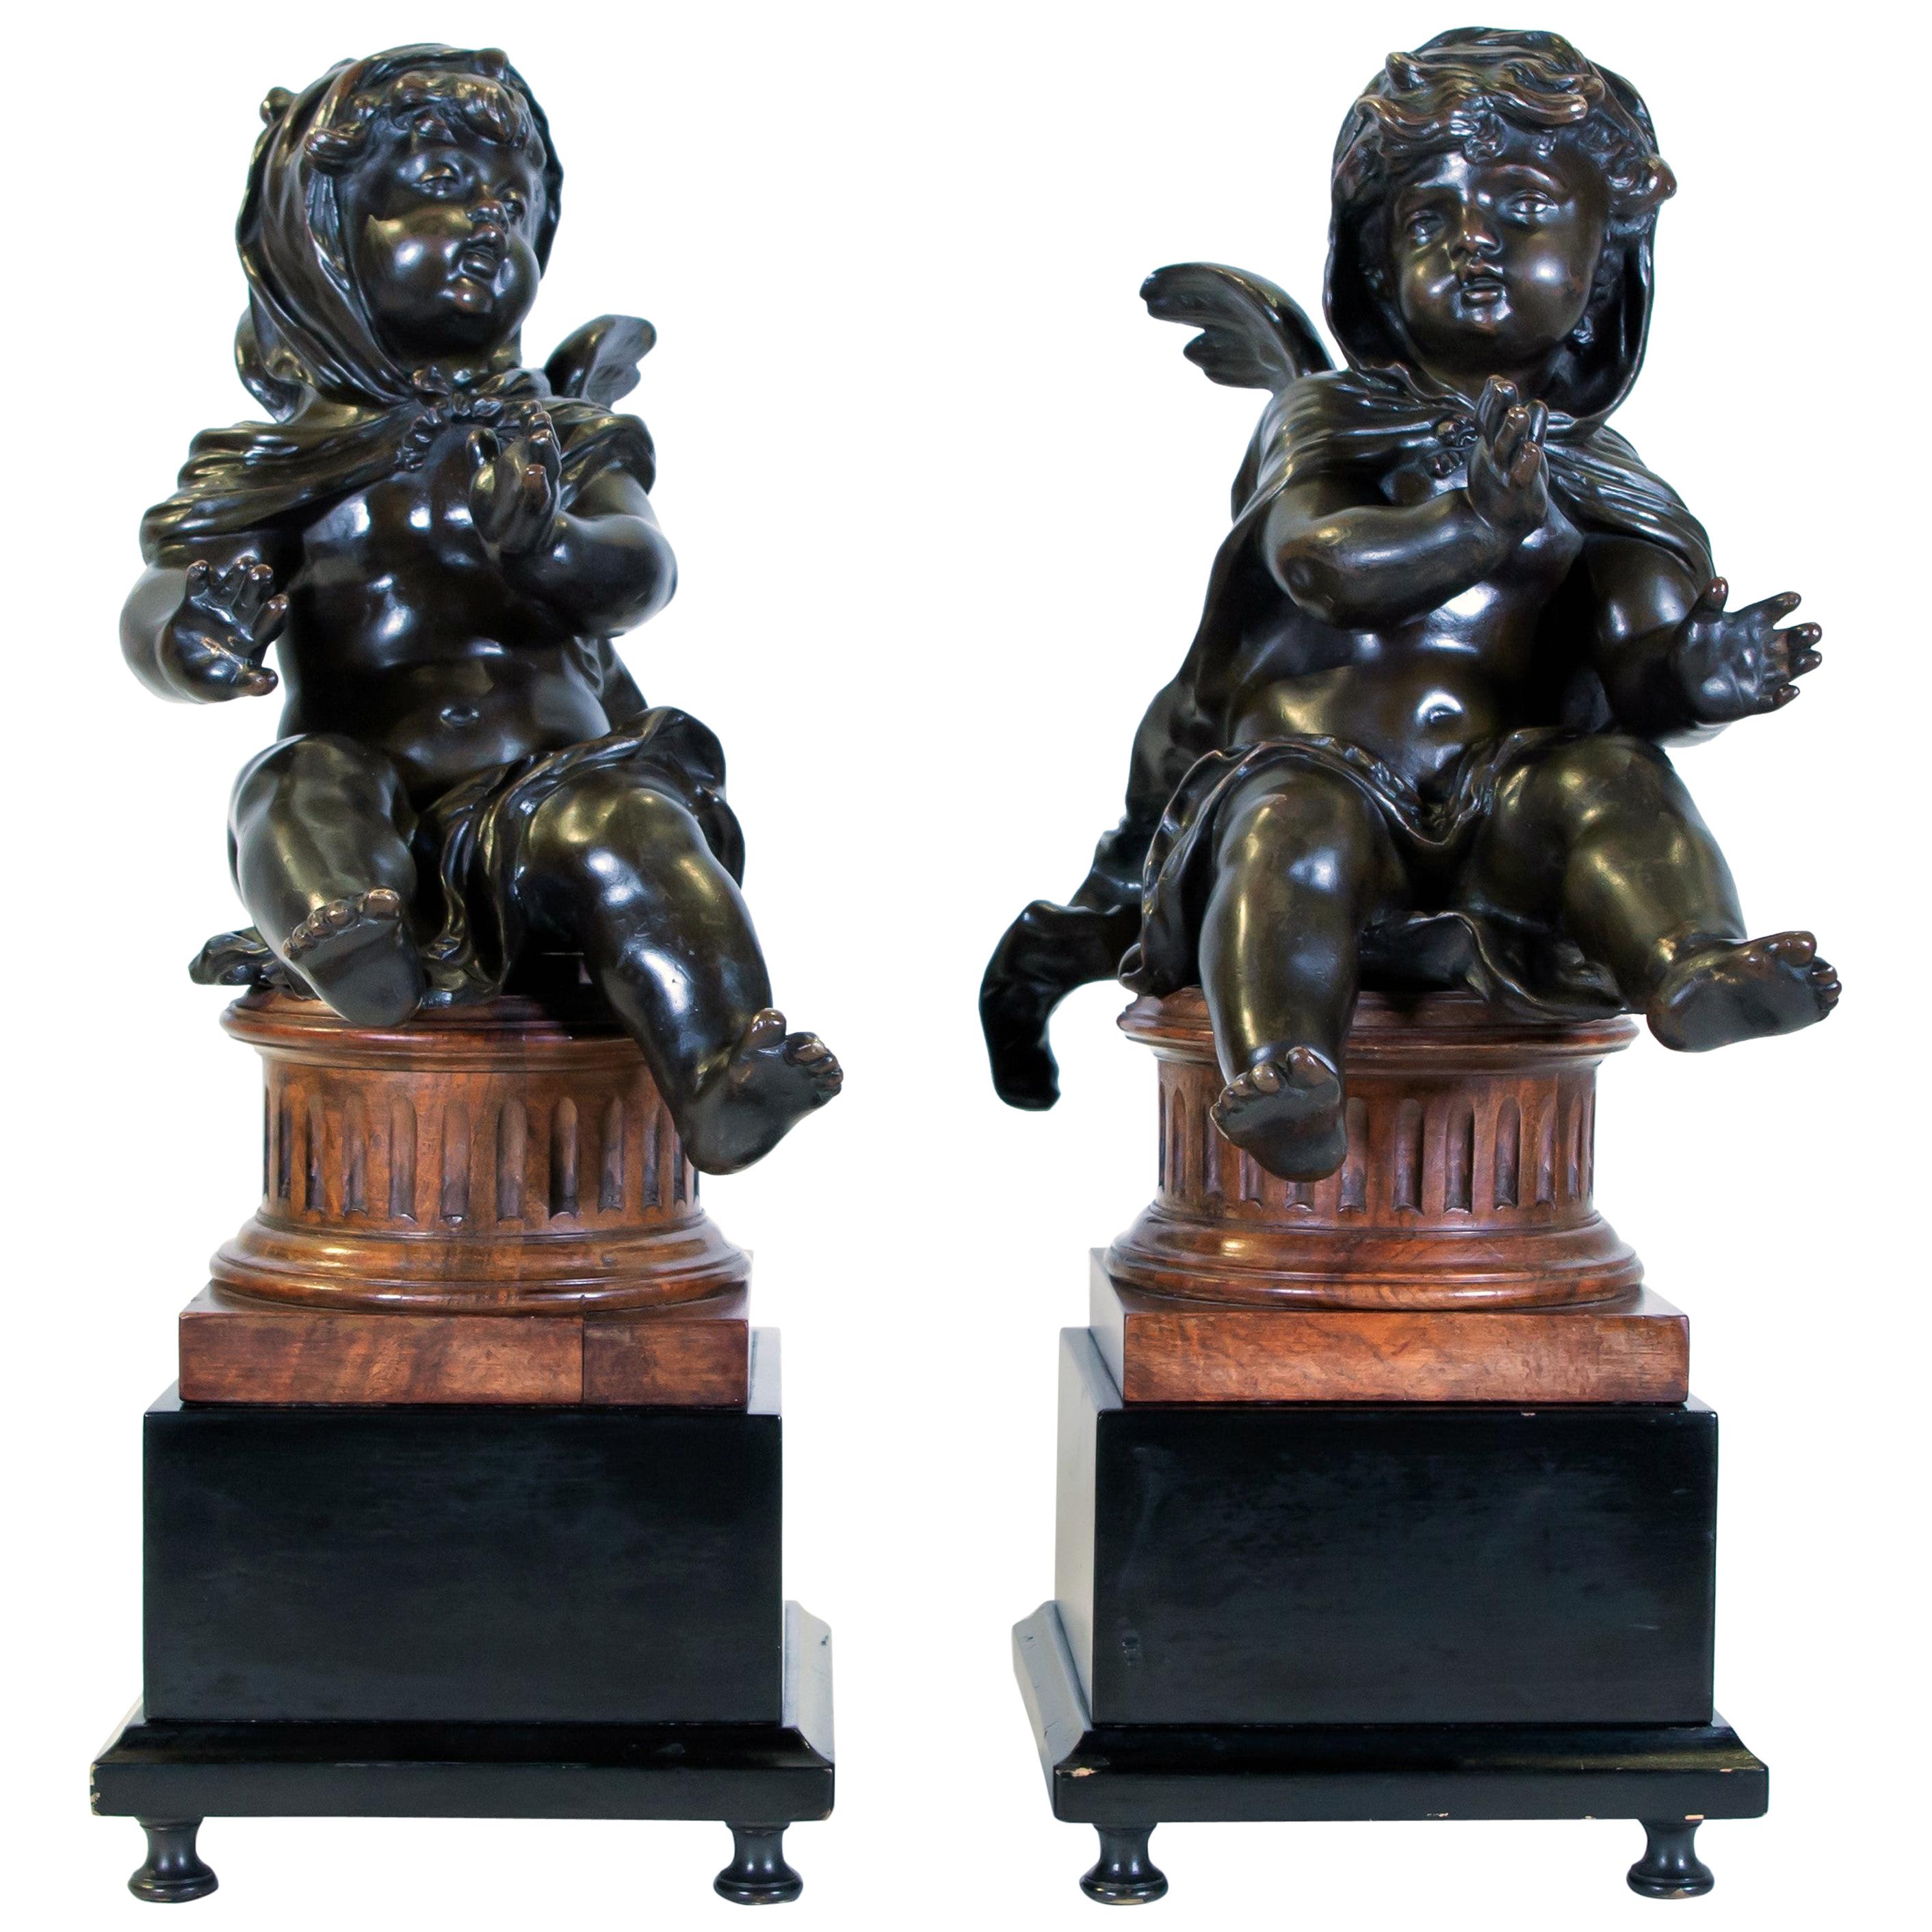 Pair of Antique French Patinated Bronze Winged Putti Seated on Fluted Plinths